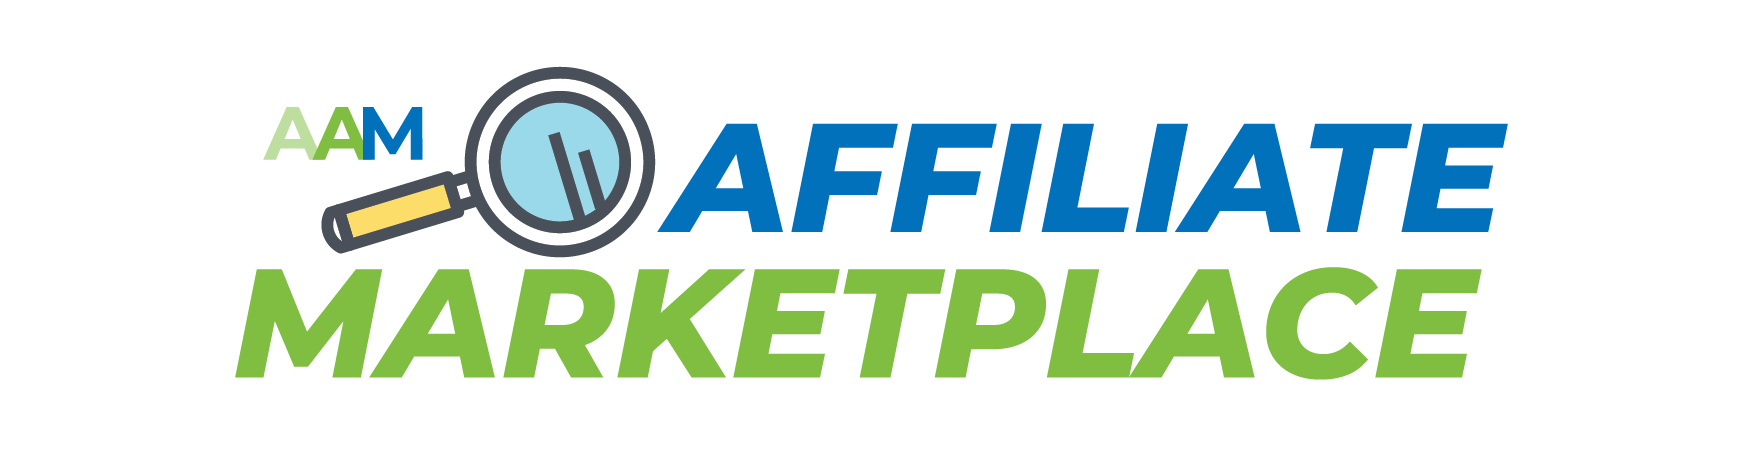 The Skillshare Affiliate Program [Review] - Free Niche Research For  Affiliate Marketing